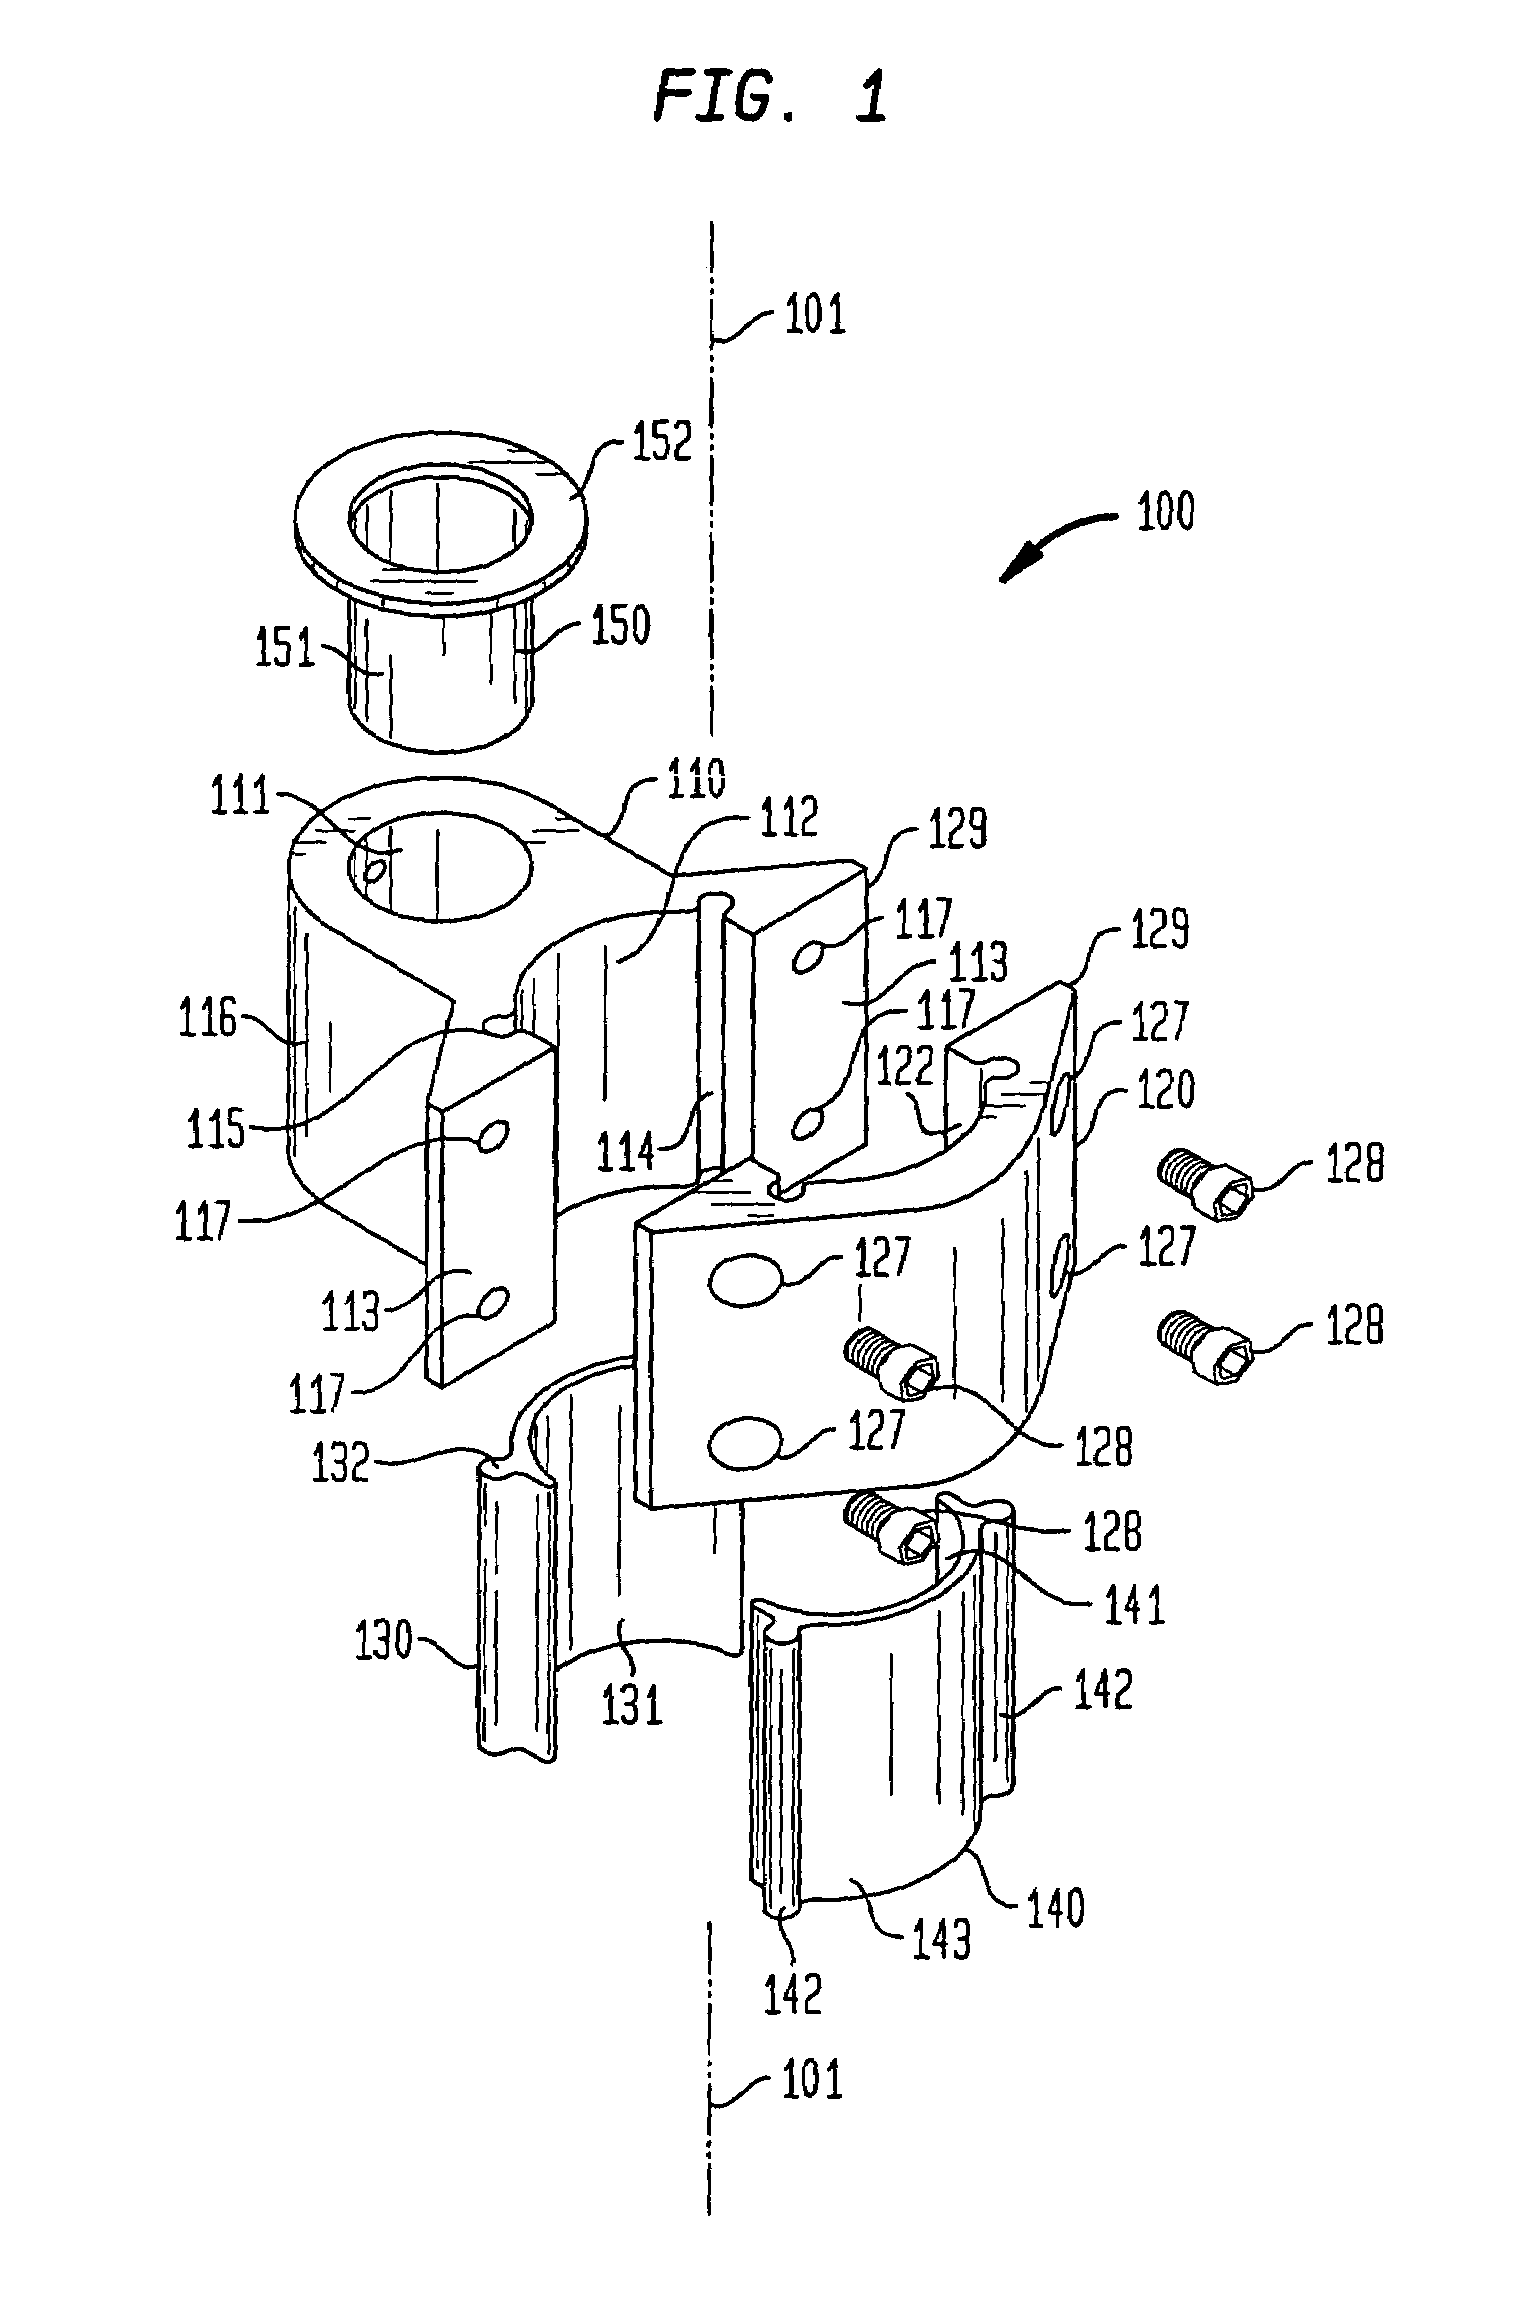 Mounting bracket for electronic device having dimensional inserts